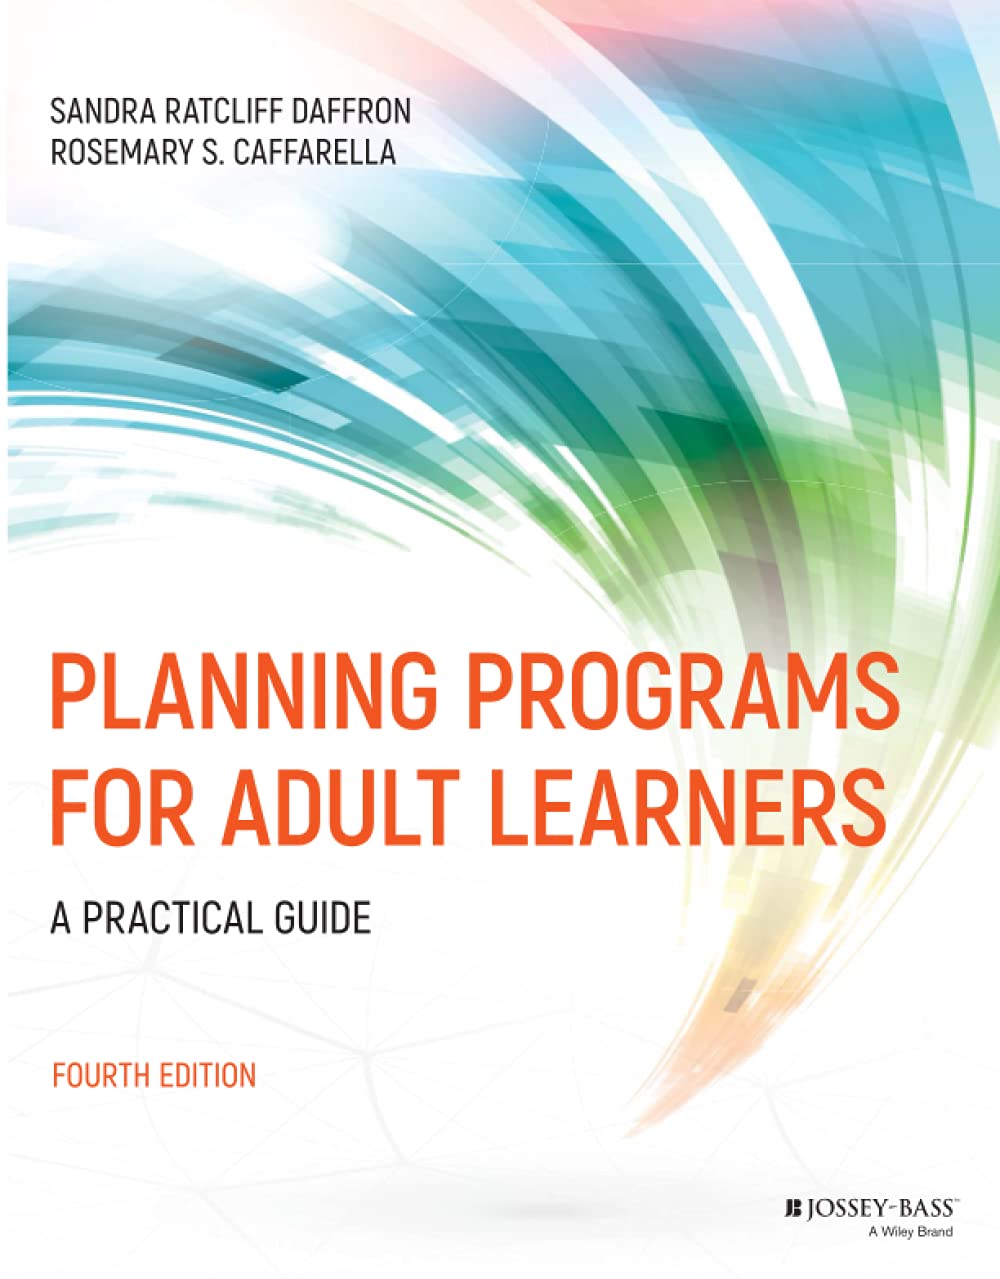 Planning Programs for Adult Learners